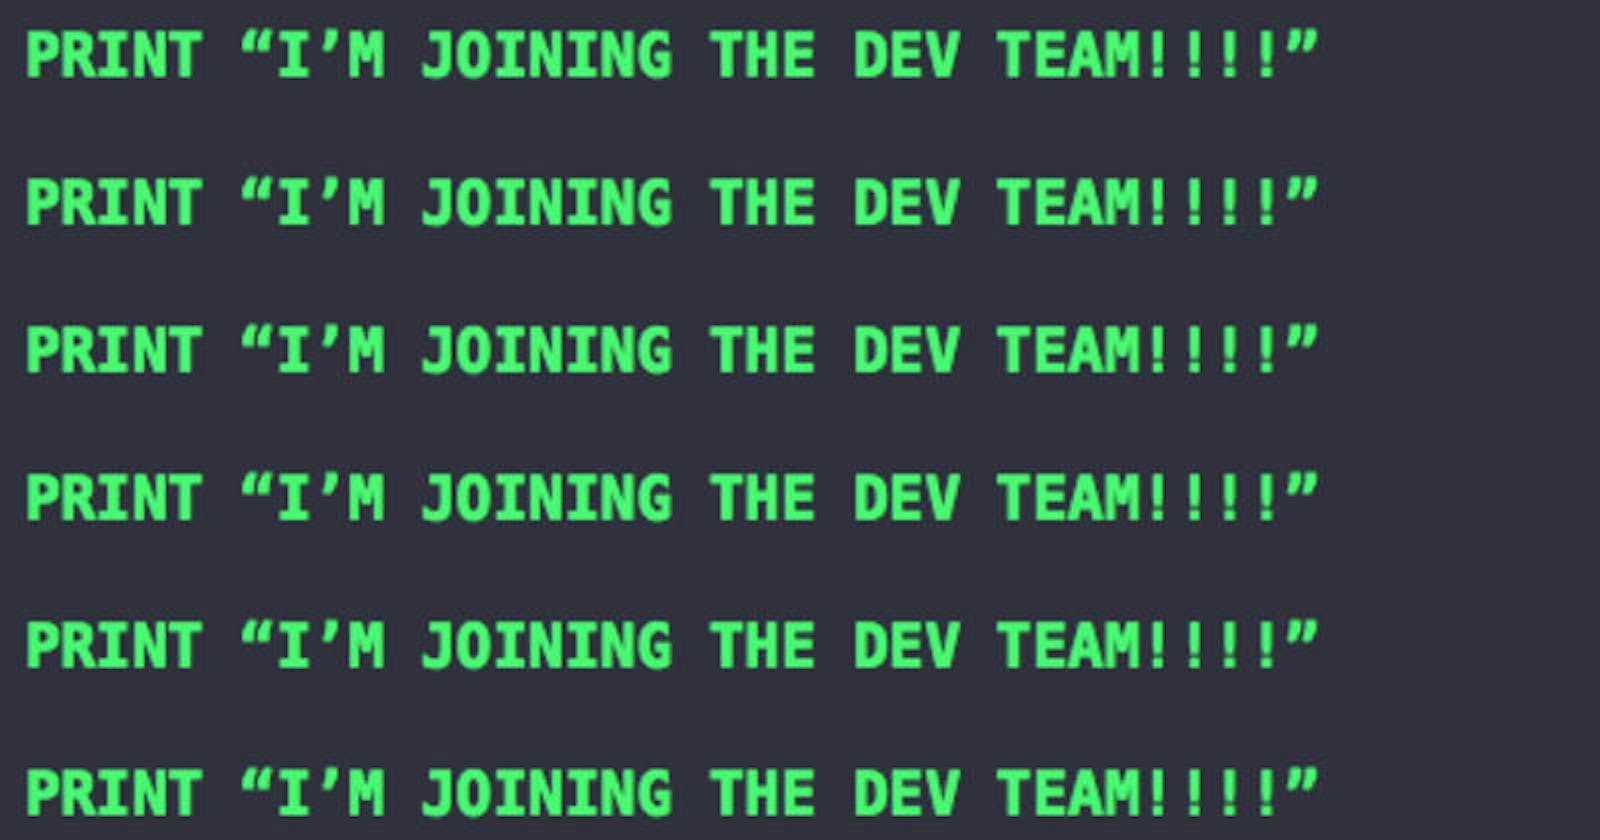 A New Year, a New Start: I'm Joining the DEV Team!